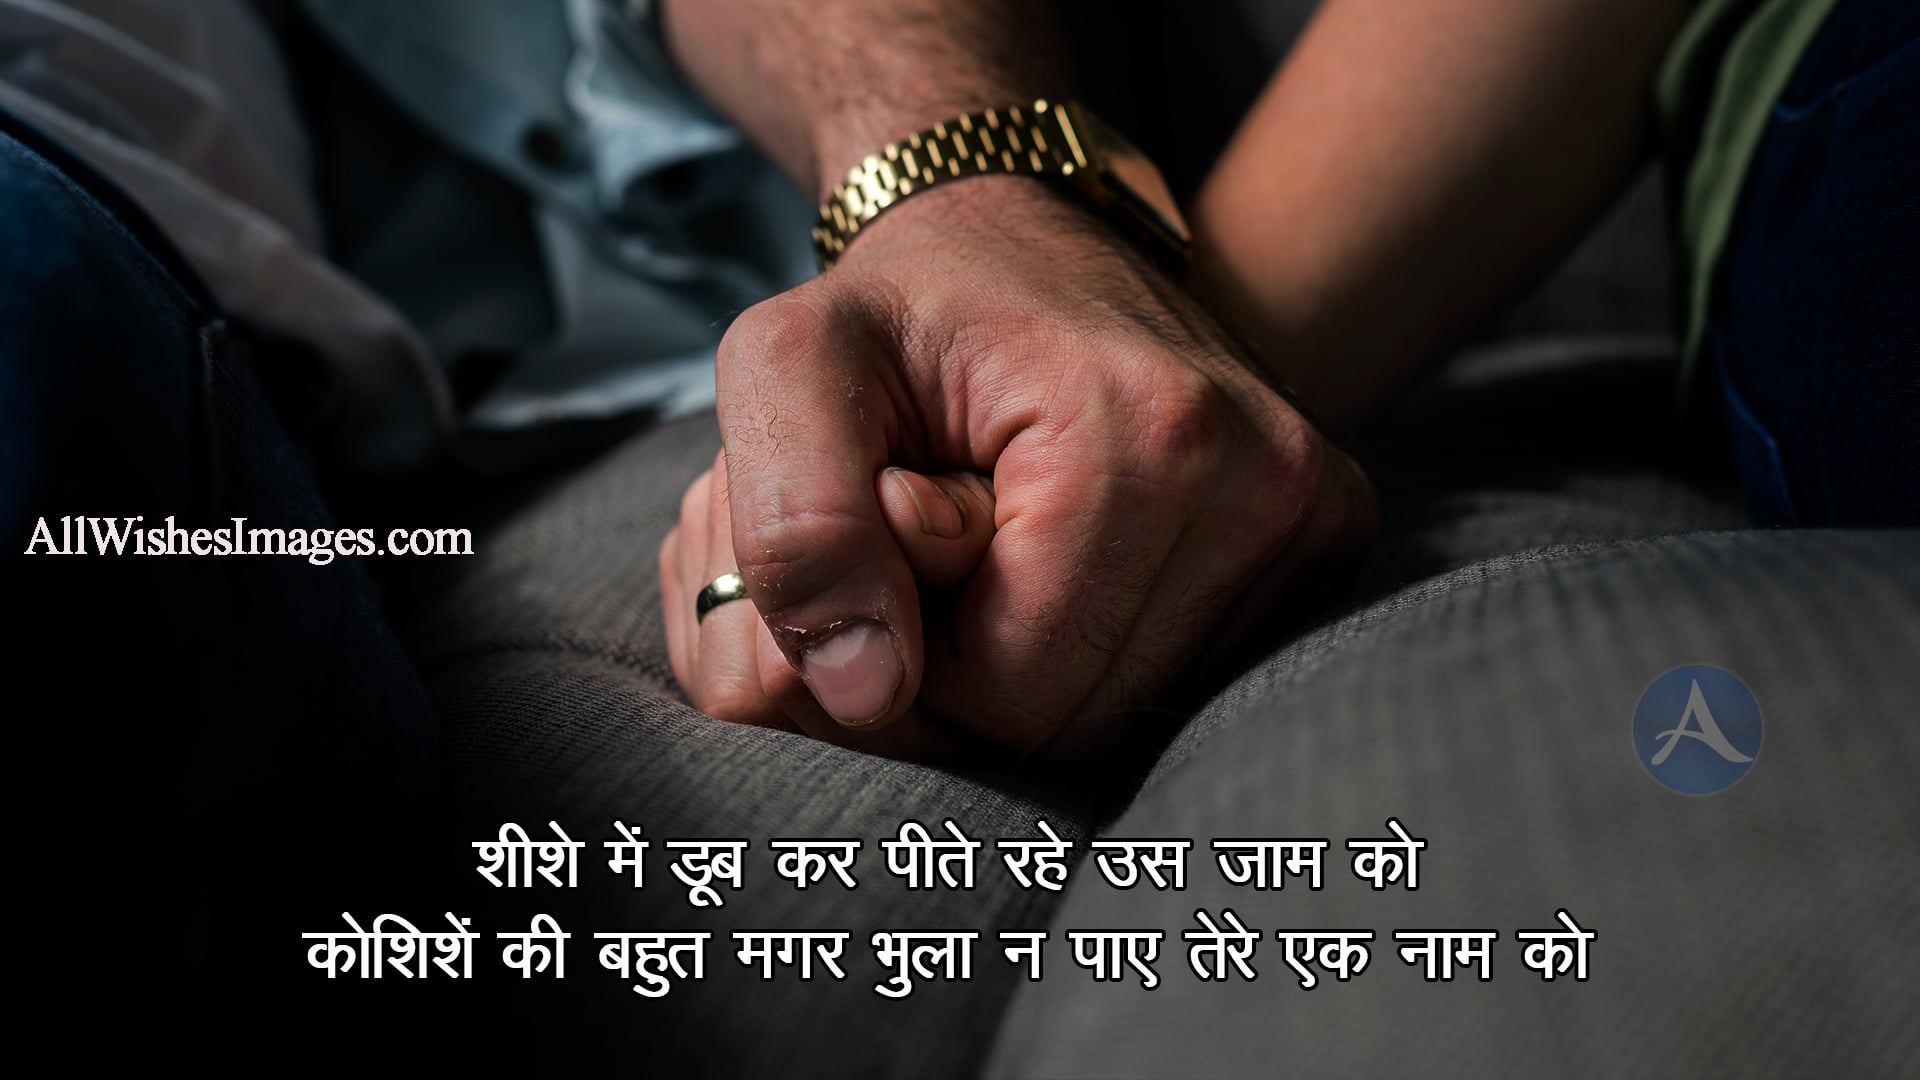 Emotionally Breakup Status Images In Hindi - All Wishes Images - Images for  WhatsApp